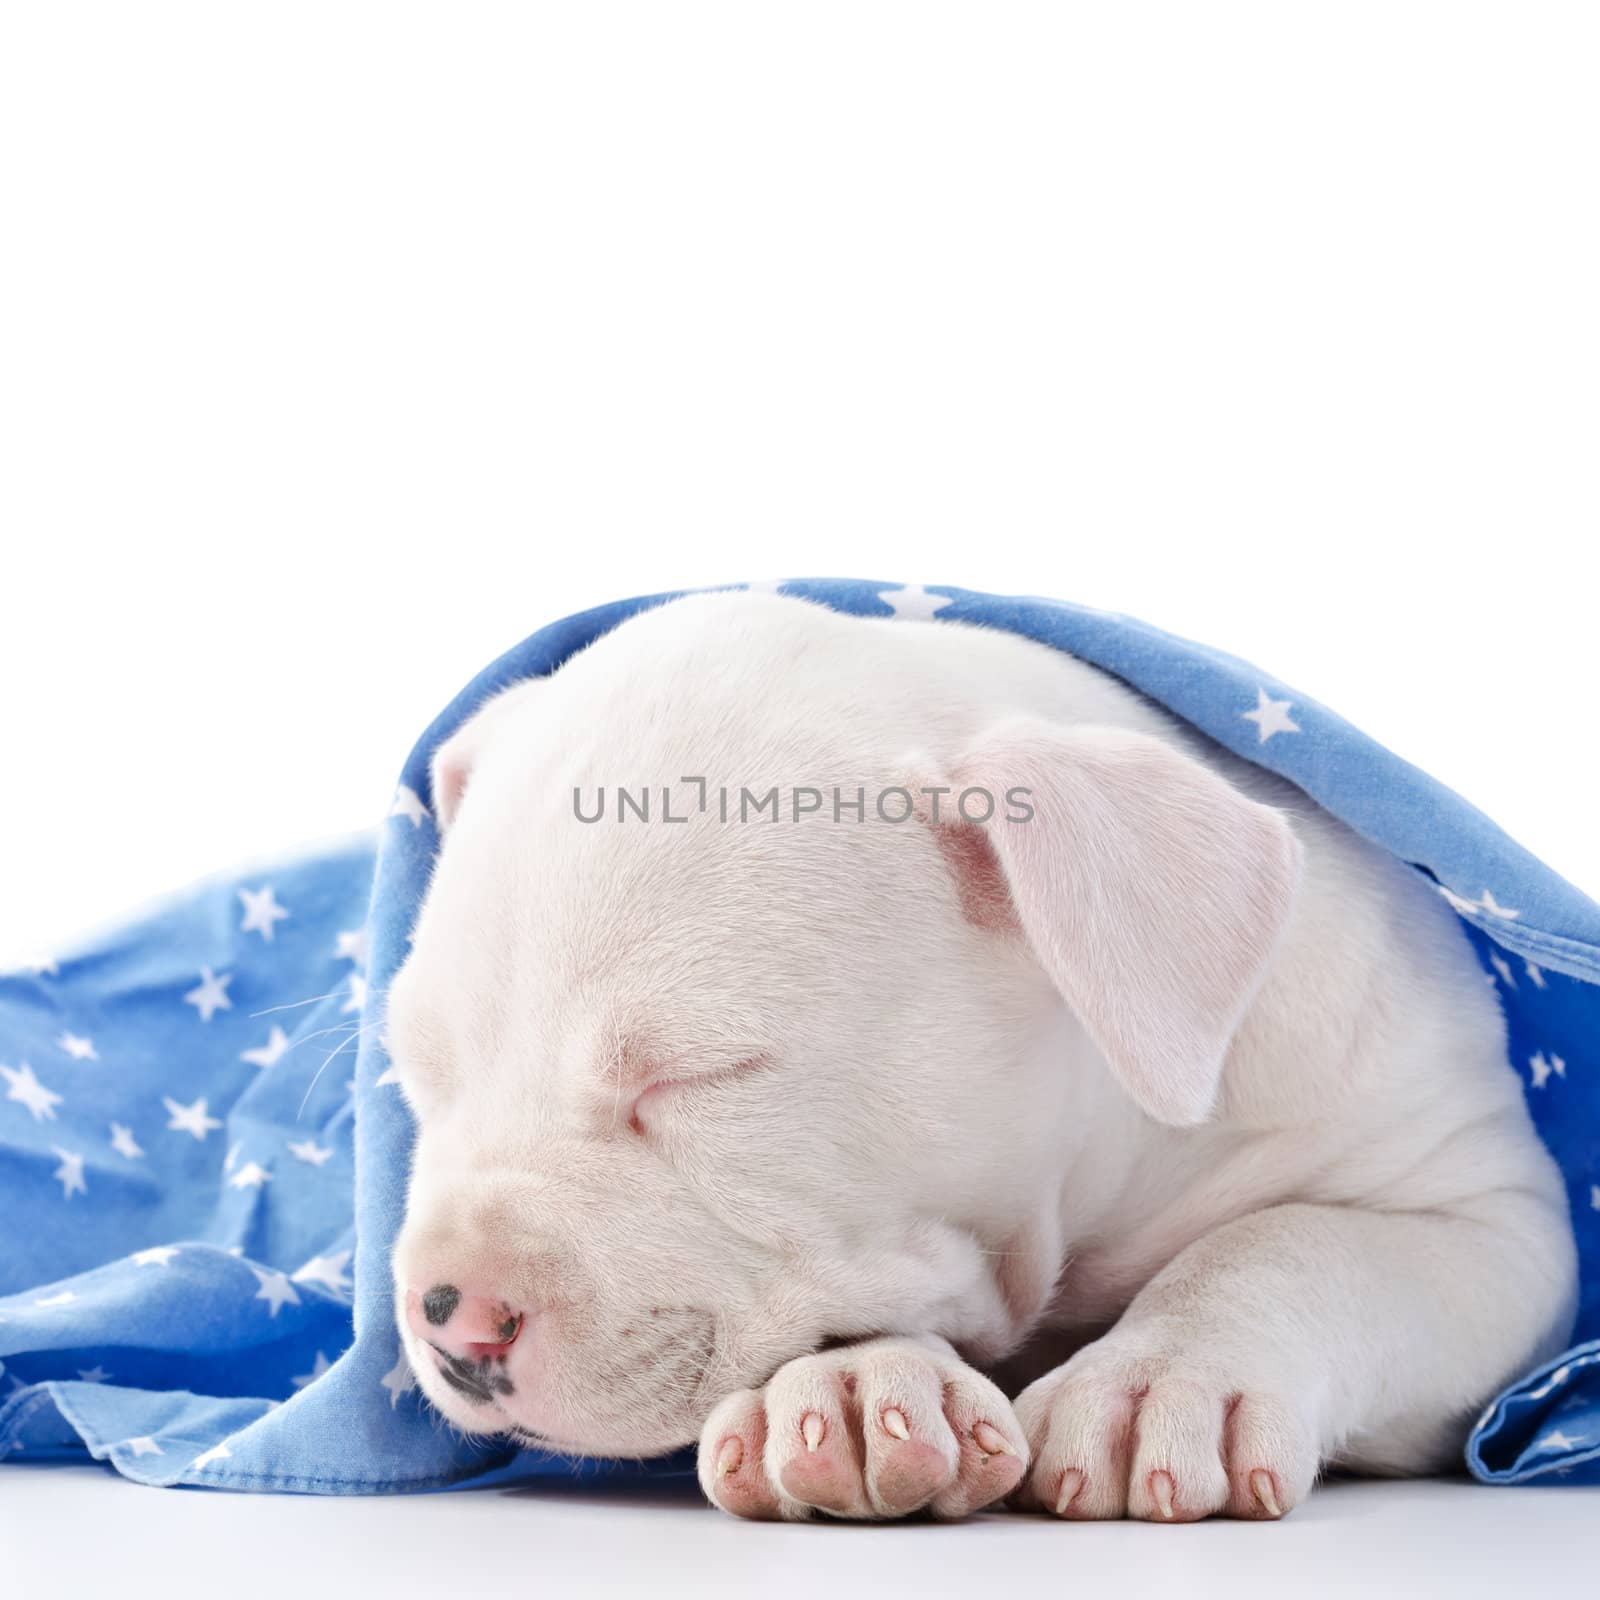 American Staffordshire Terrier Dog Puppy covered with blue starry blanket, sleeping, head closeup